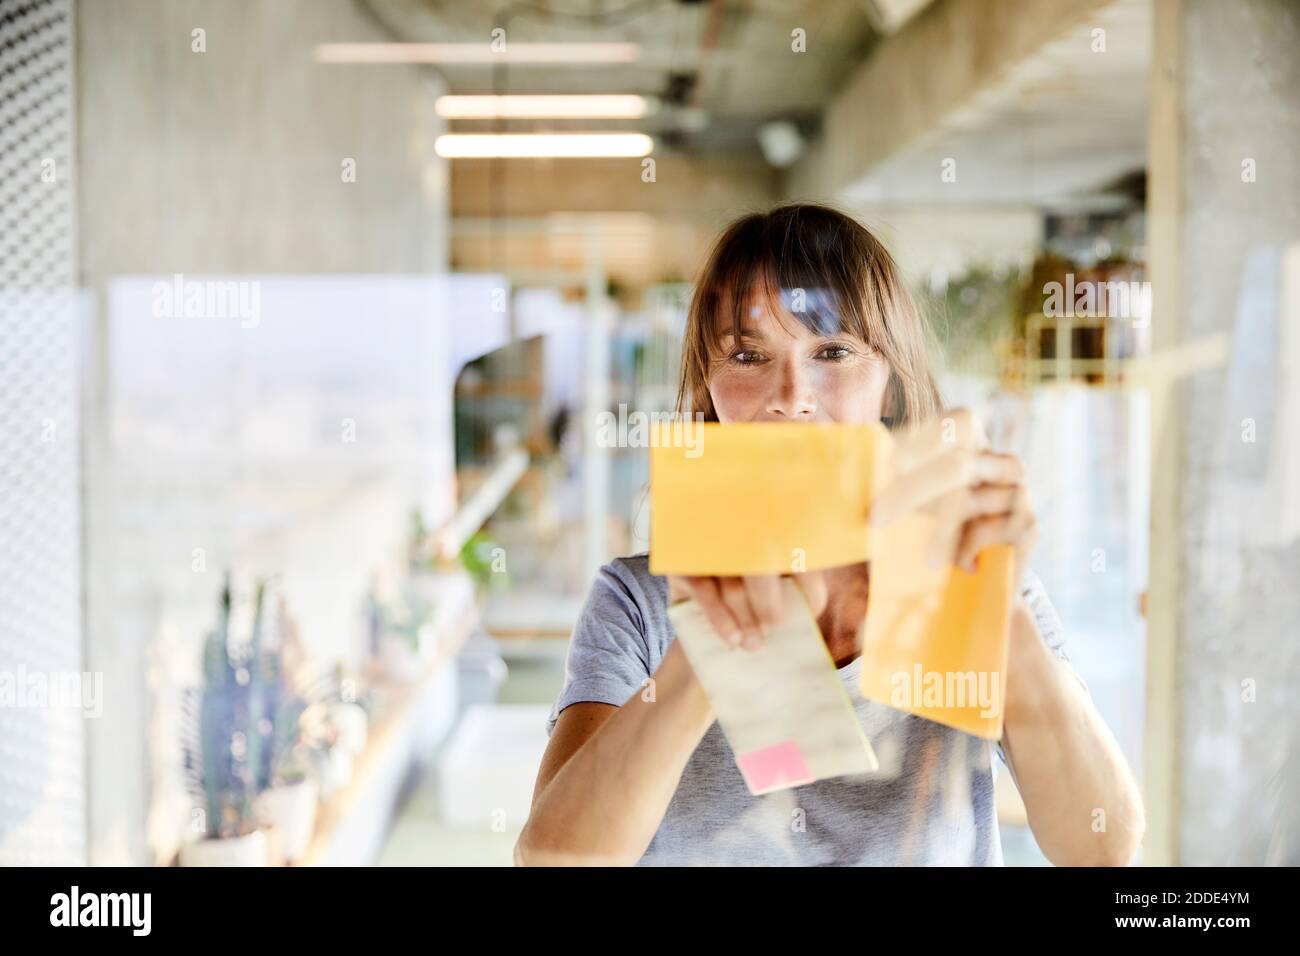 Mature woman sticking sticky notes on glass material Stock Photo